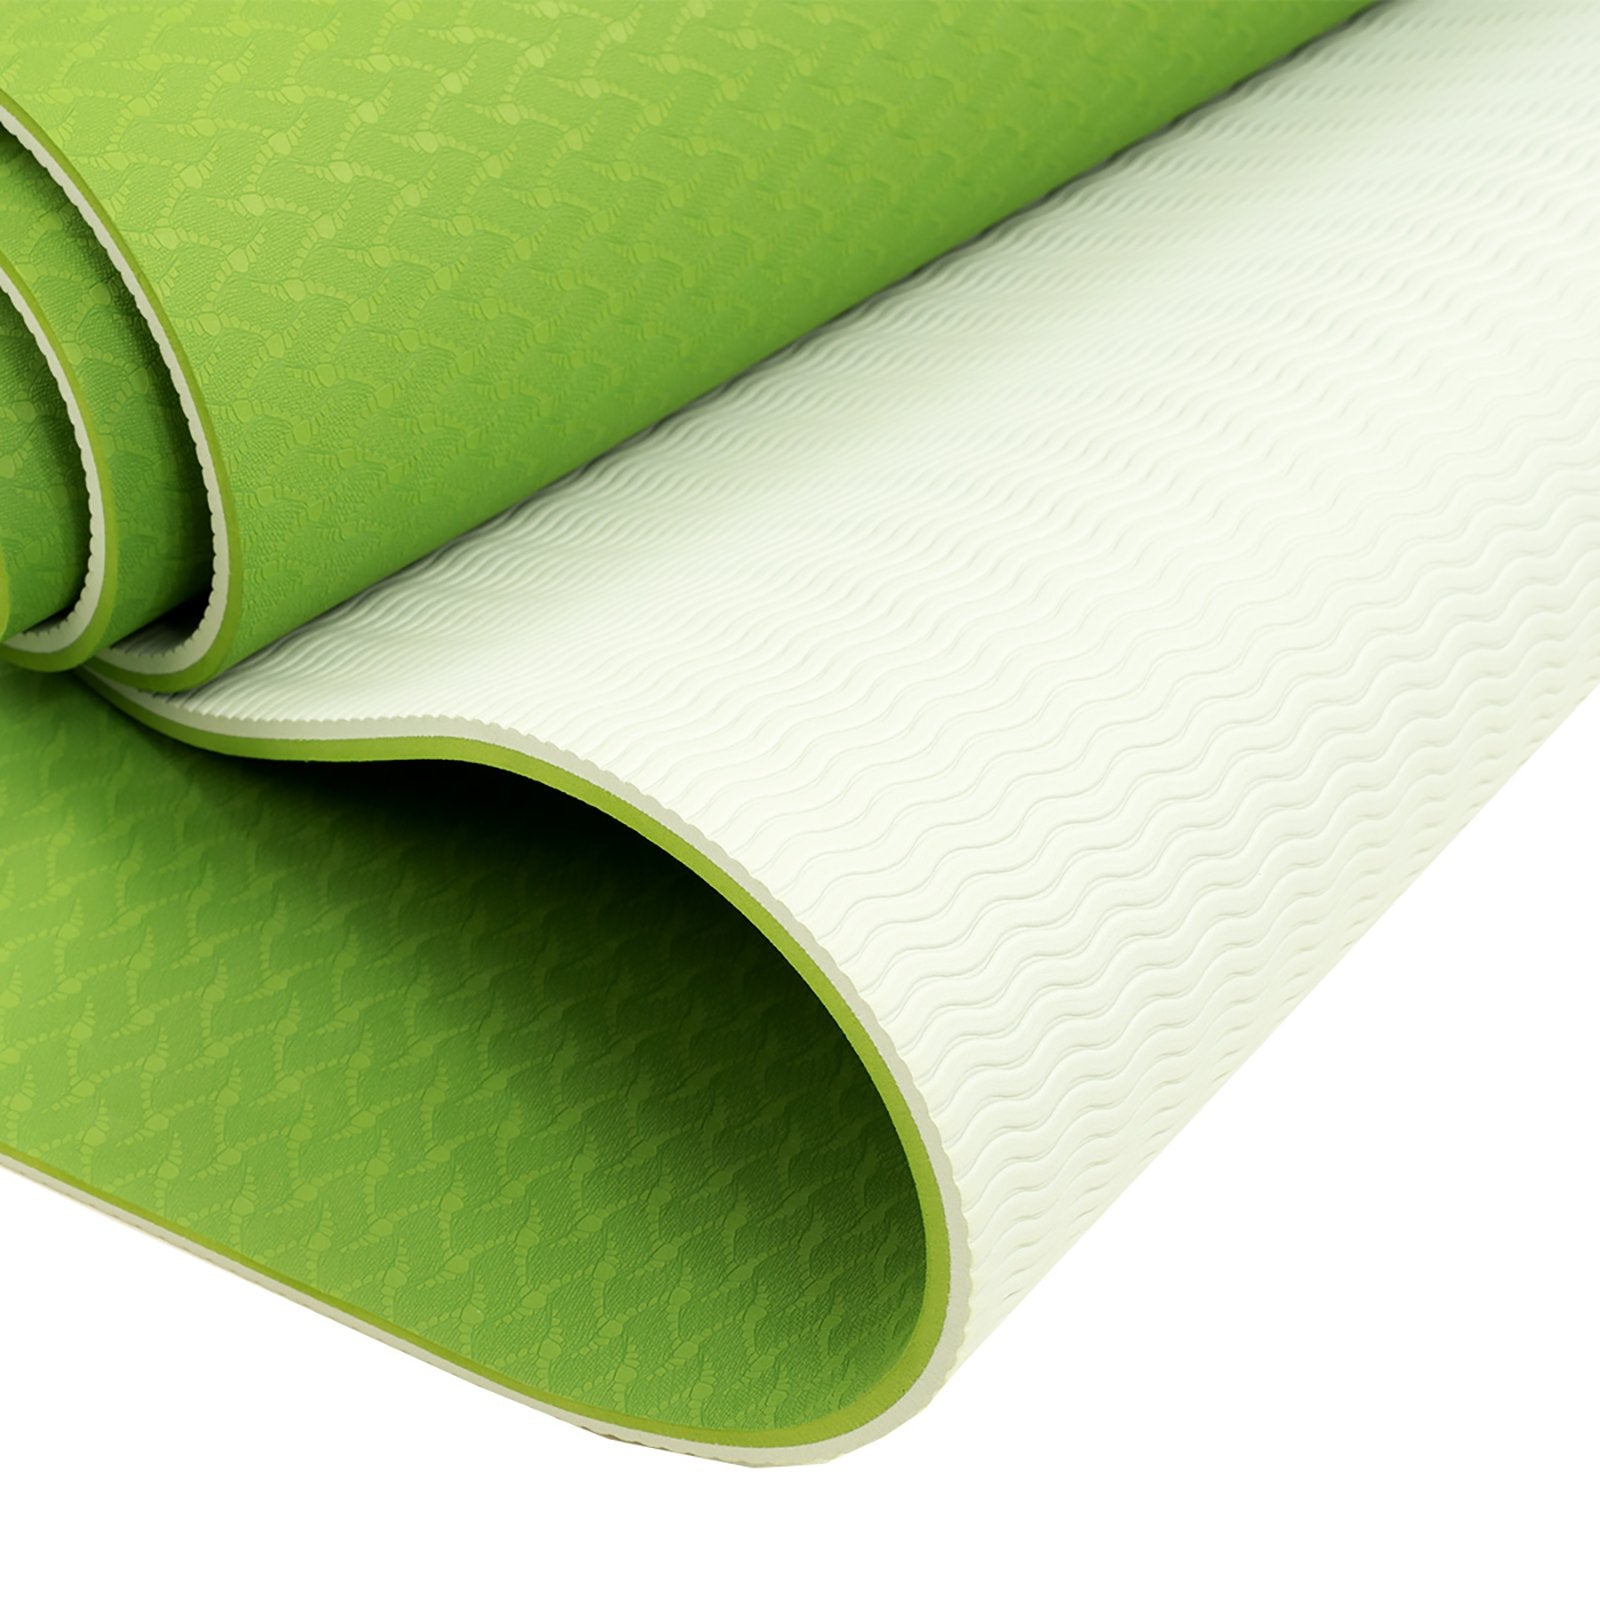 Eco-Friendly Dual layer 8mm Yoga Mat | Lime Green | Non-Slip Surface, and Carry Strap for Ultimate Comfort and Portability